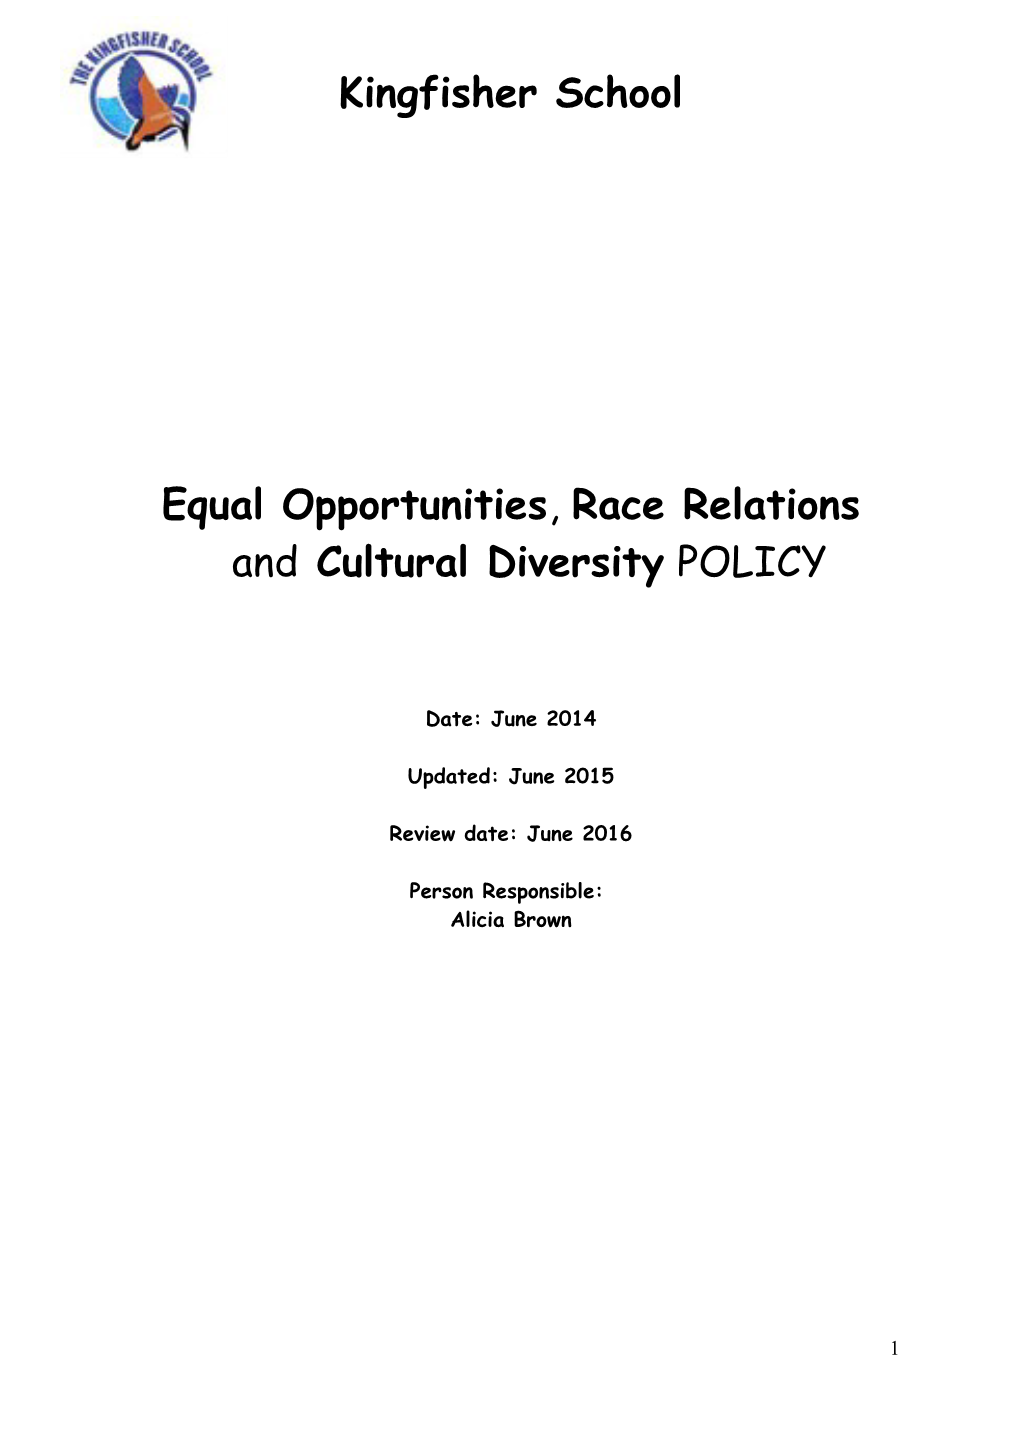 Model Equal Opportunities Policy for Schools